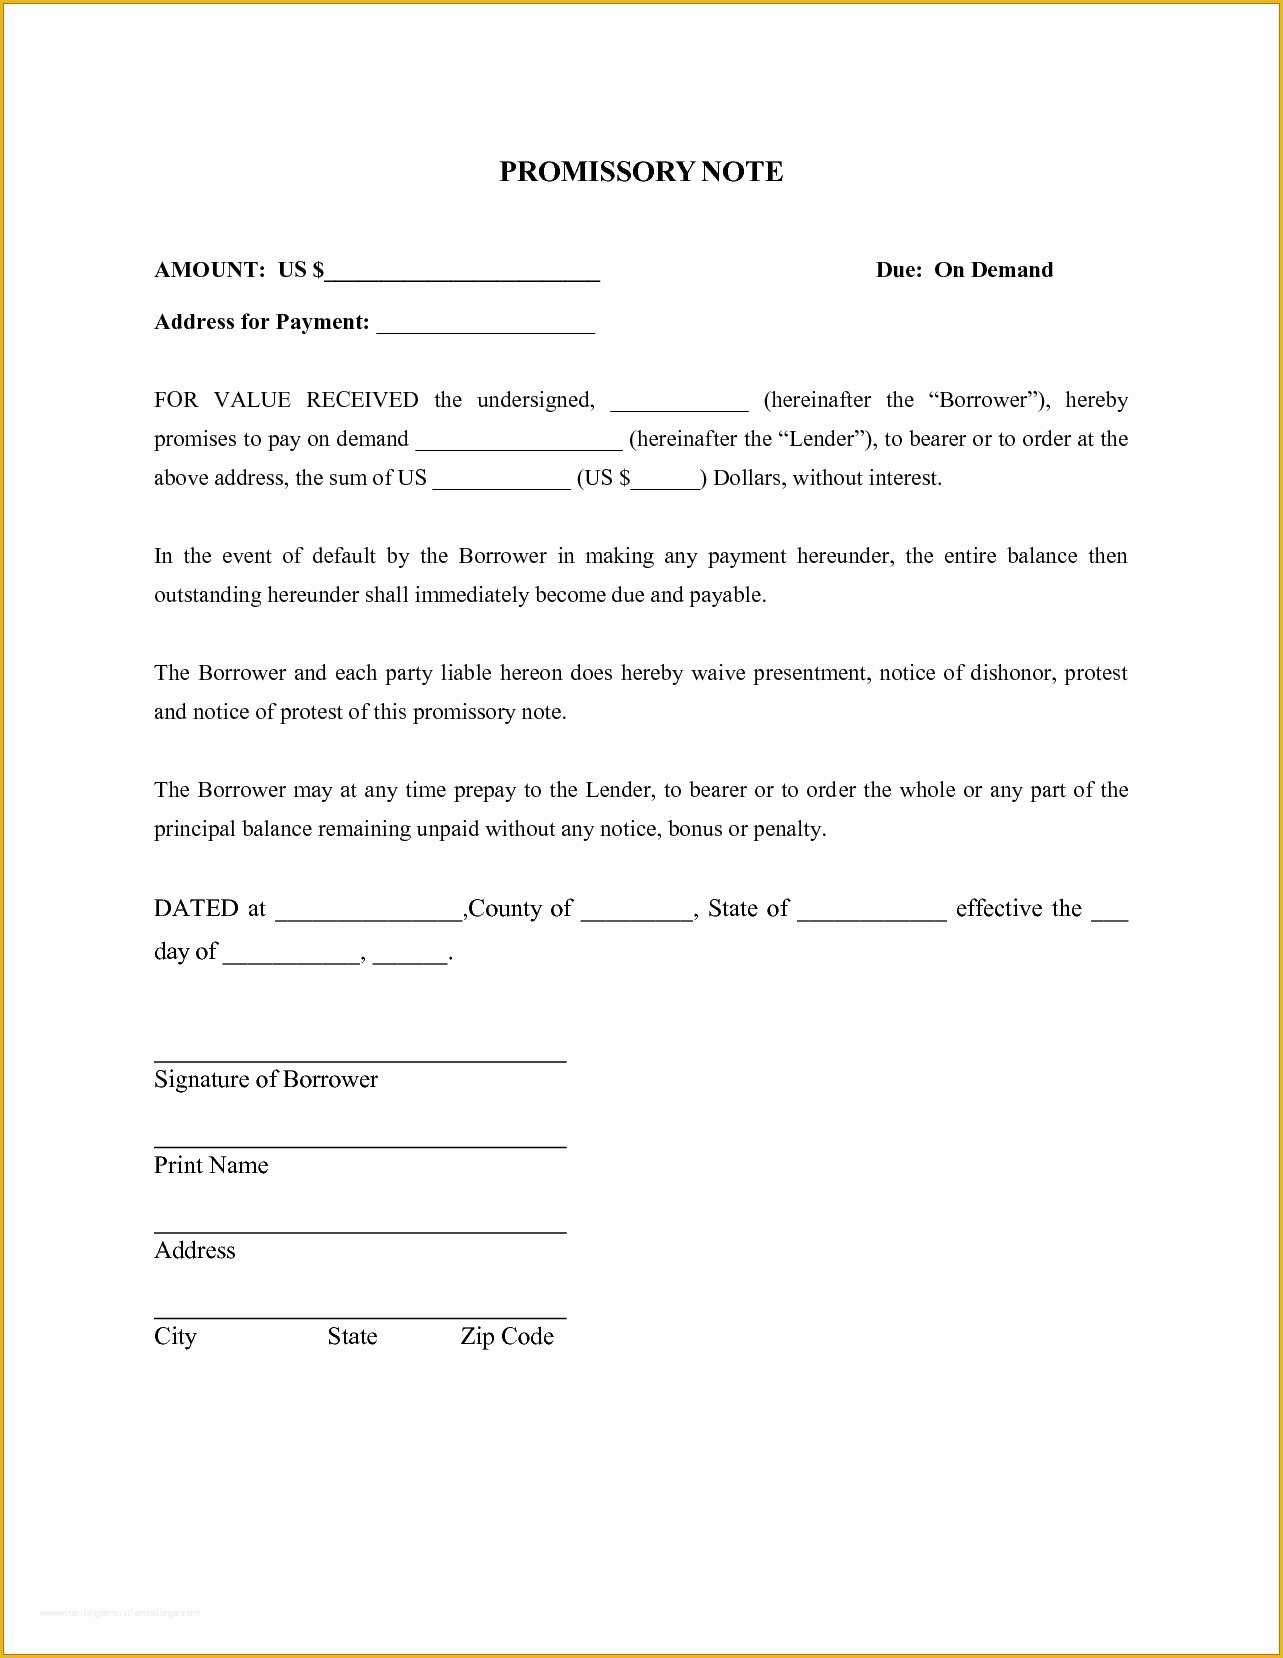 Free Promissory Note Template Of Simple Promissory Note forms ...